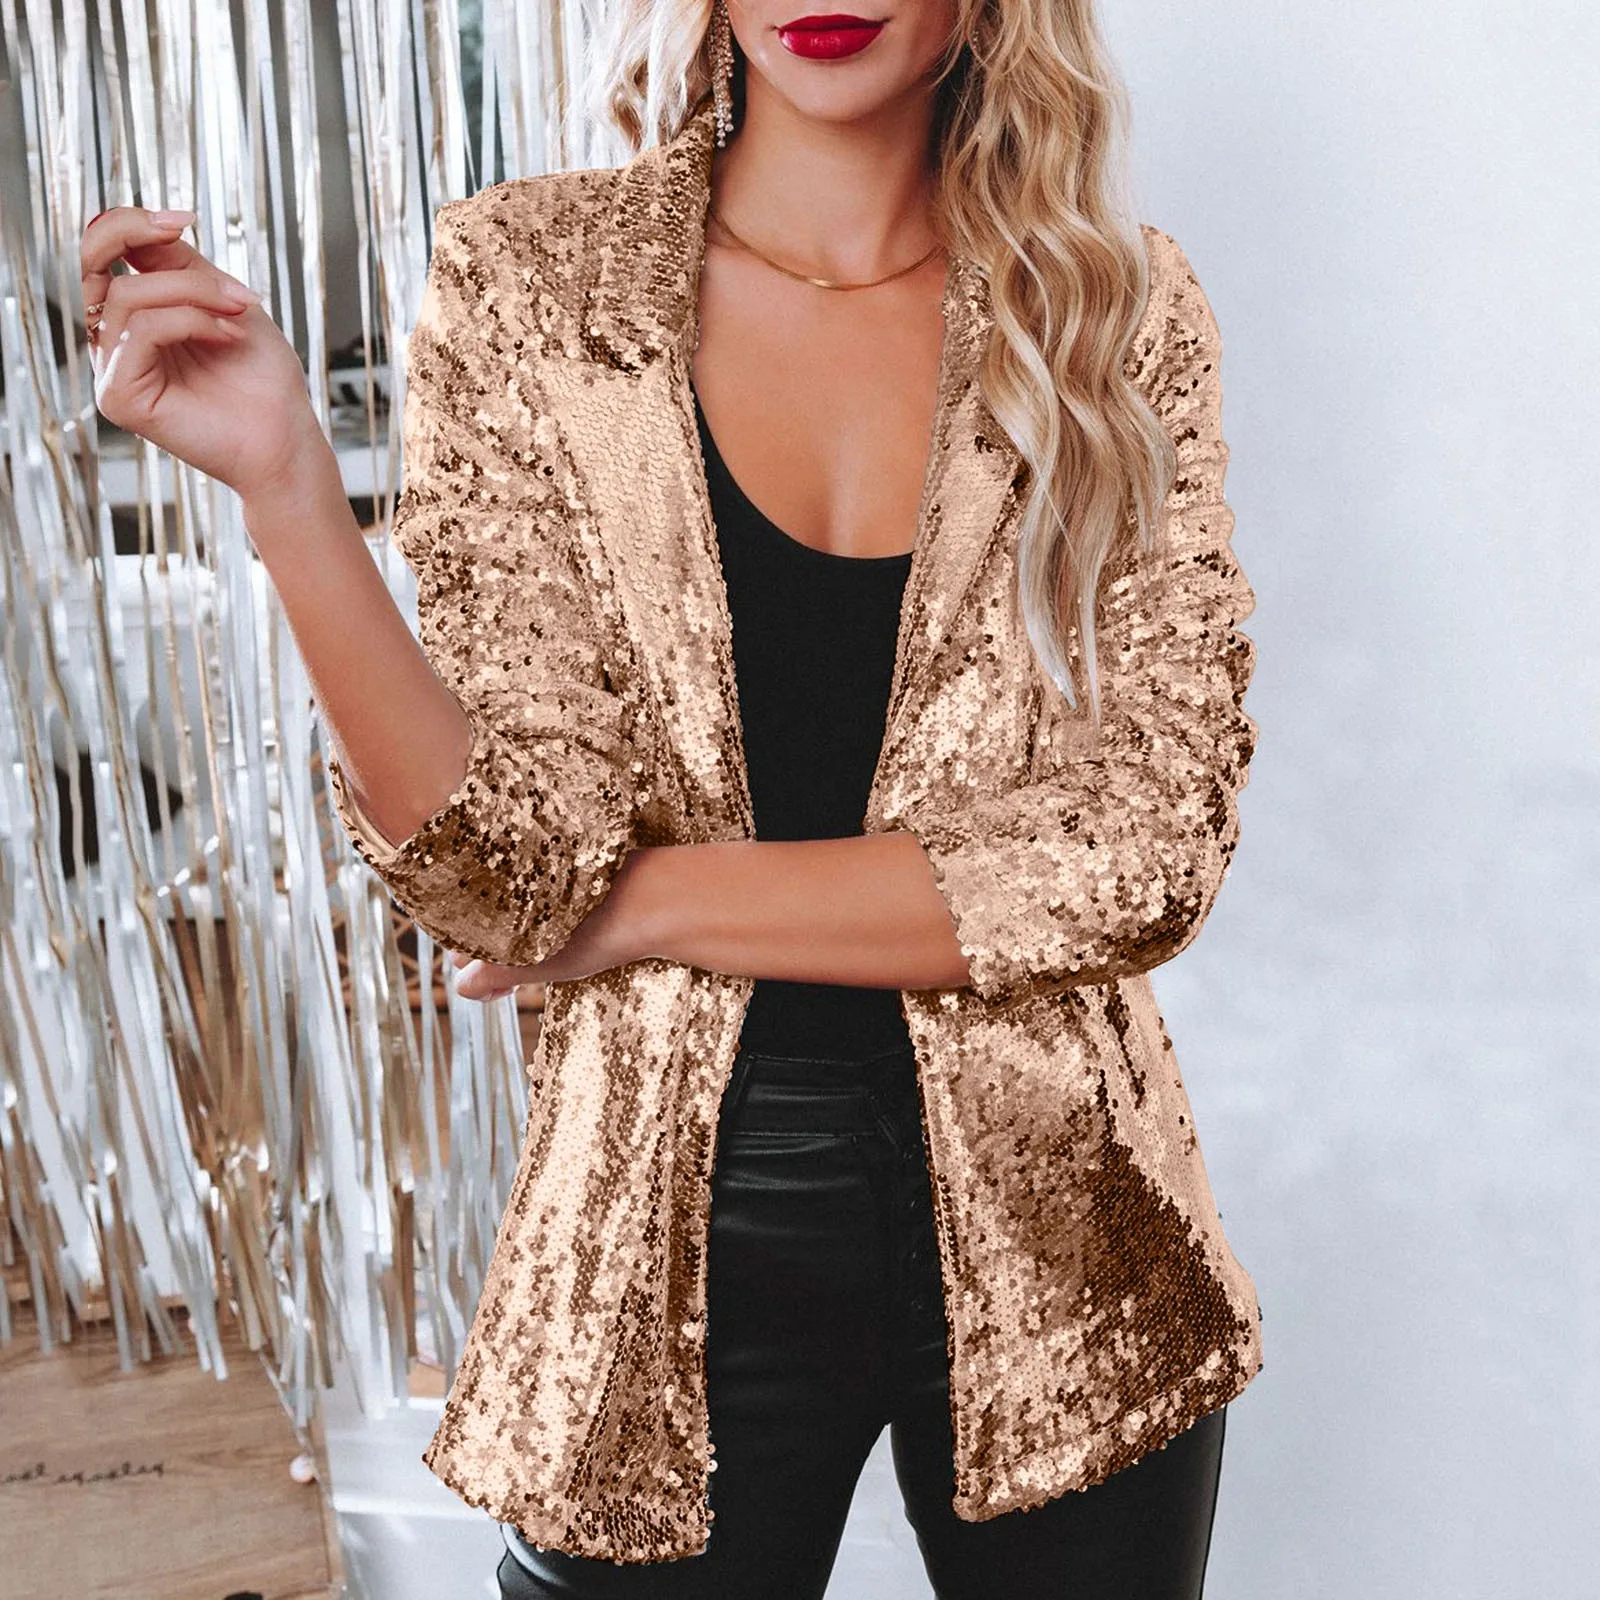 

Black Sequin Shinny Shirt Jacket Outerwear Women Casual Loose Blazer Stage Party Nightclub Costume Chemise Homme Disco Camisas